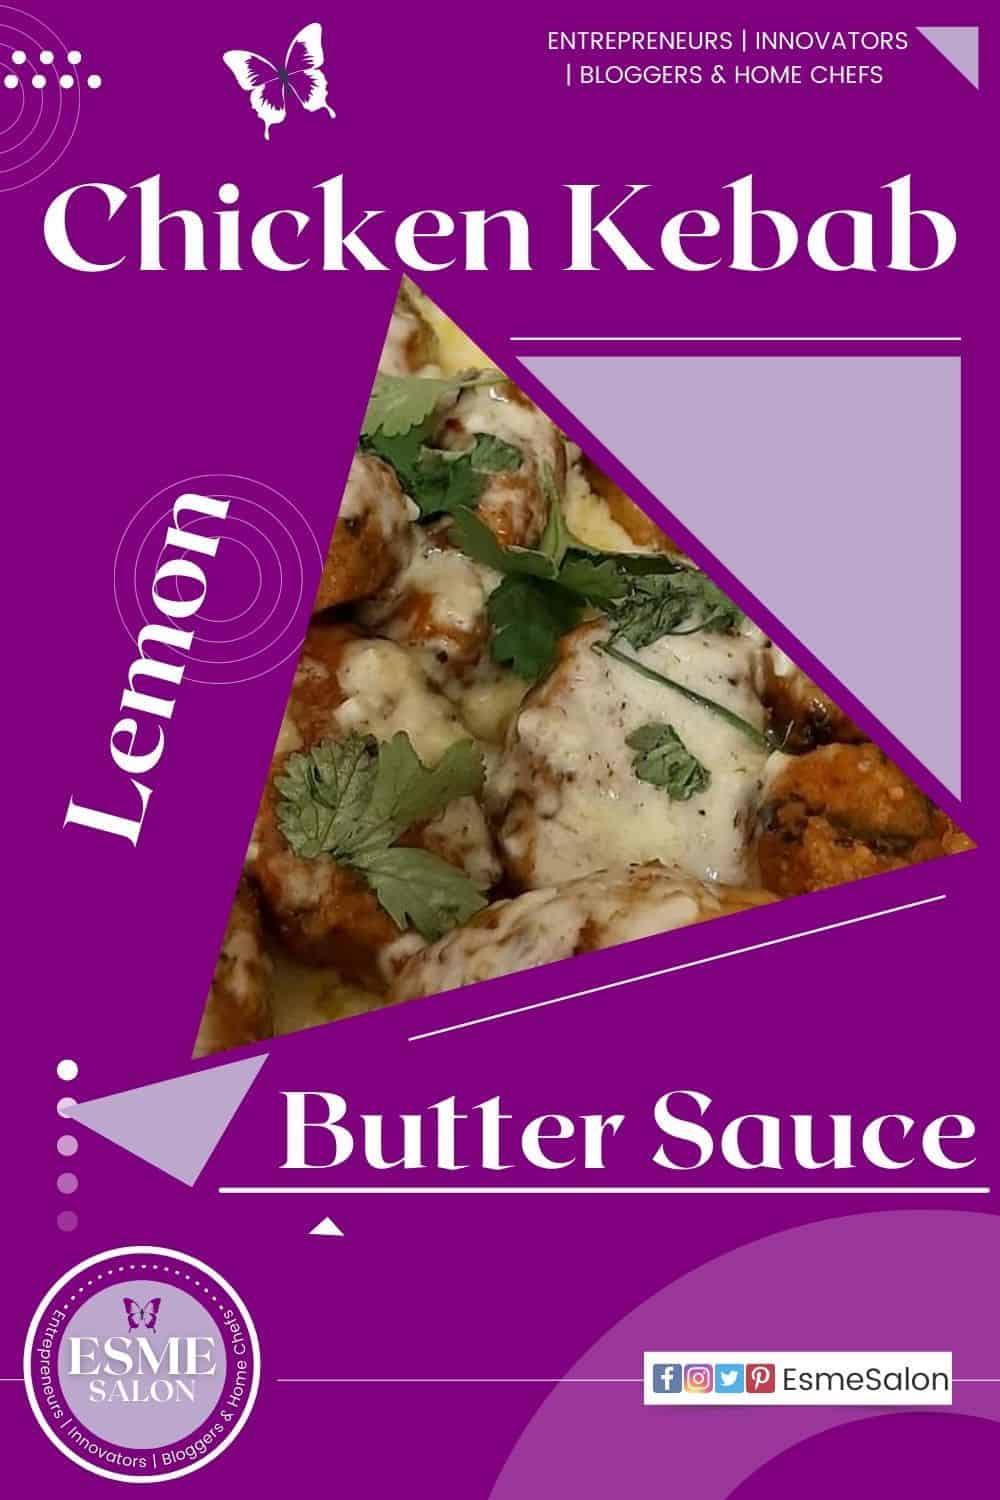 Lemon butter sauce drenched over small chicken kebabs